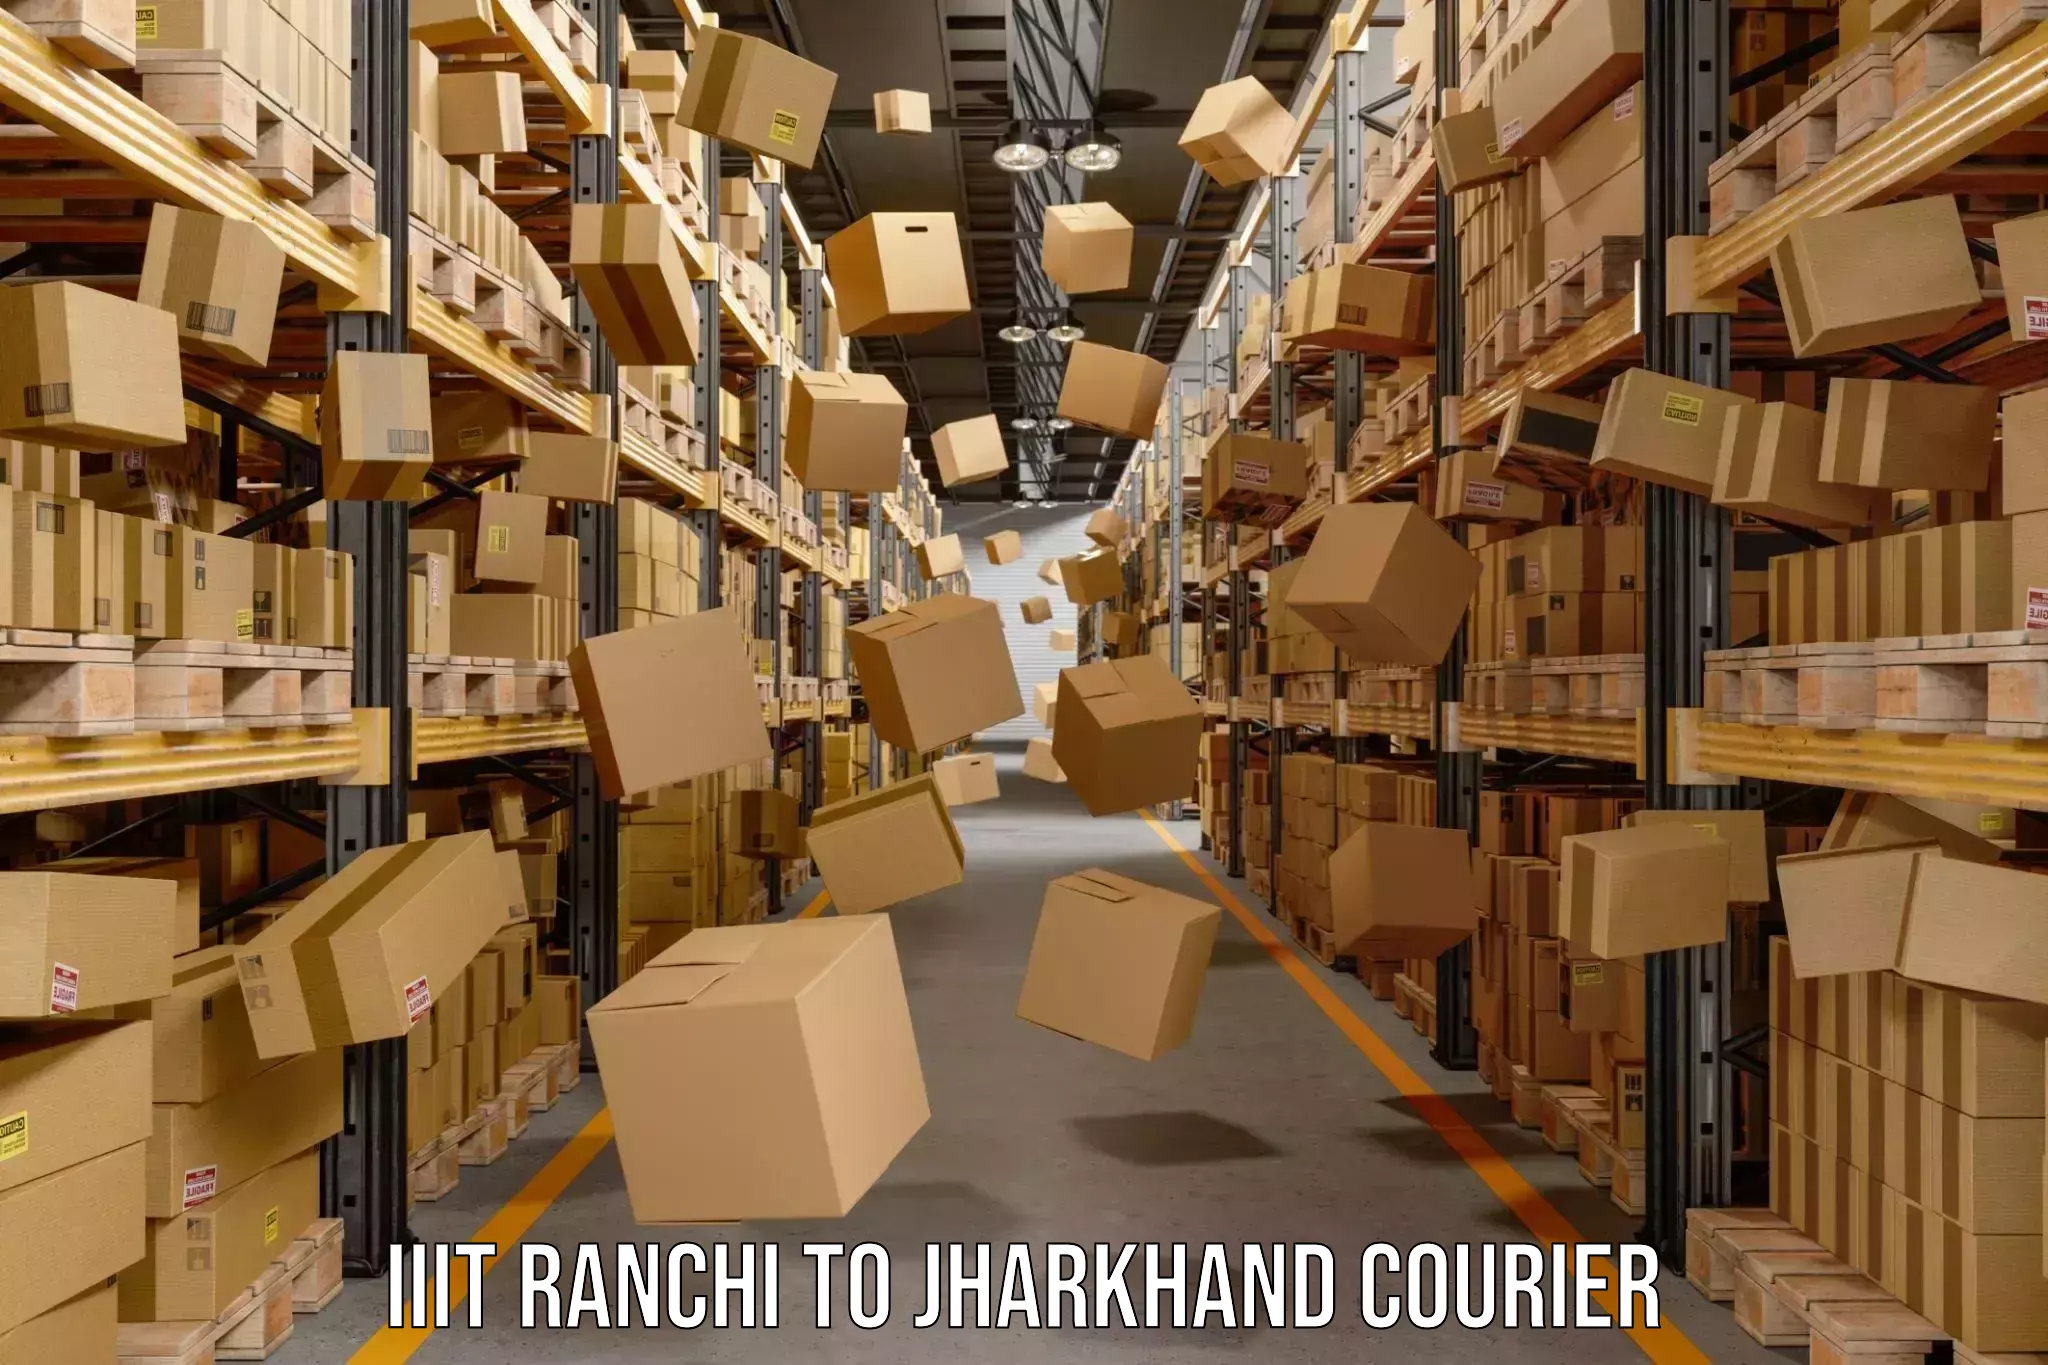 Reliable courier service IIIT Ranchi to Jharkhand